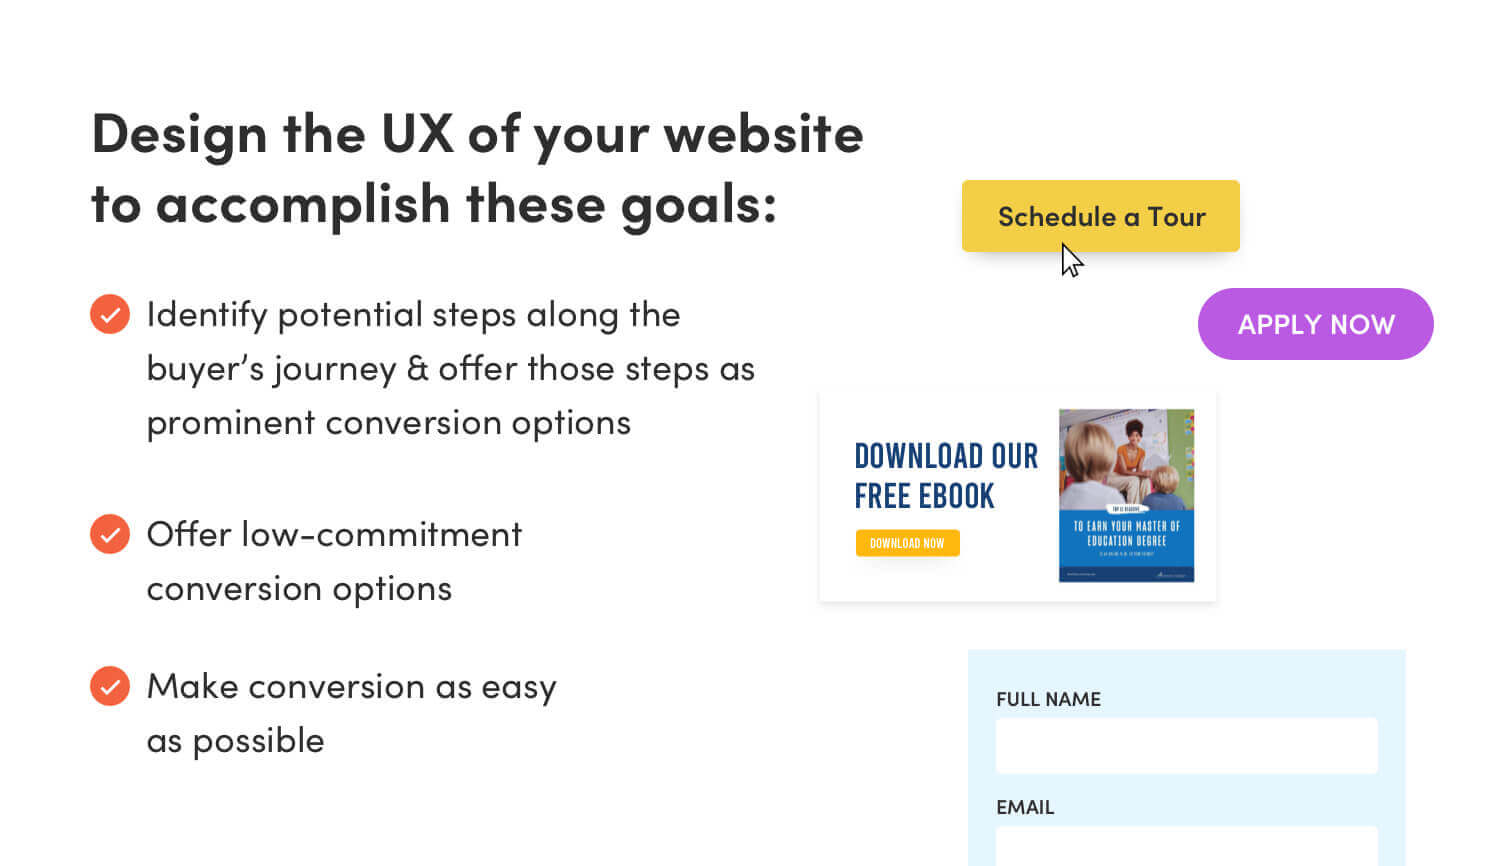 infographic with tips on how to design the ux of a higher education website to accomplish goals like ID'ing steps along the buyers journey, offering low-commitment conversion options and making conversion as easy as possible.